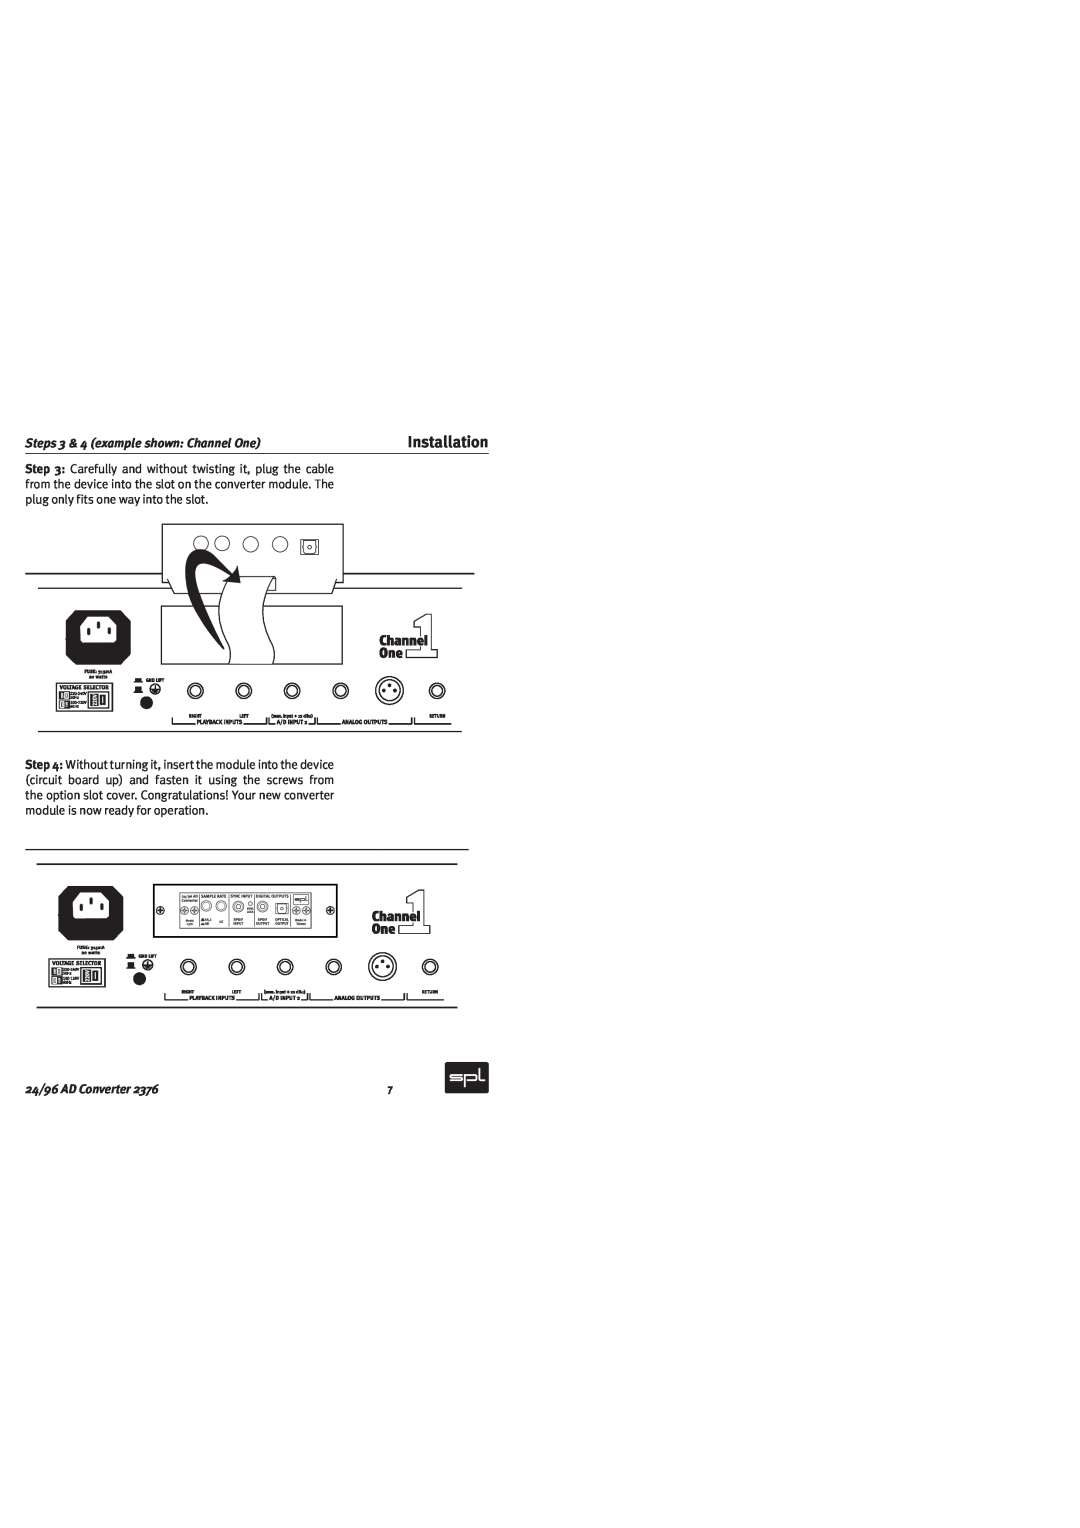 Sound Performance Lab 2376 owner manual Steps 3 & 4 example shown Channel One, Installation, 24/96 AD Converter 